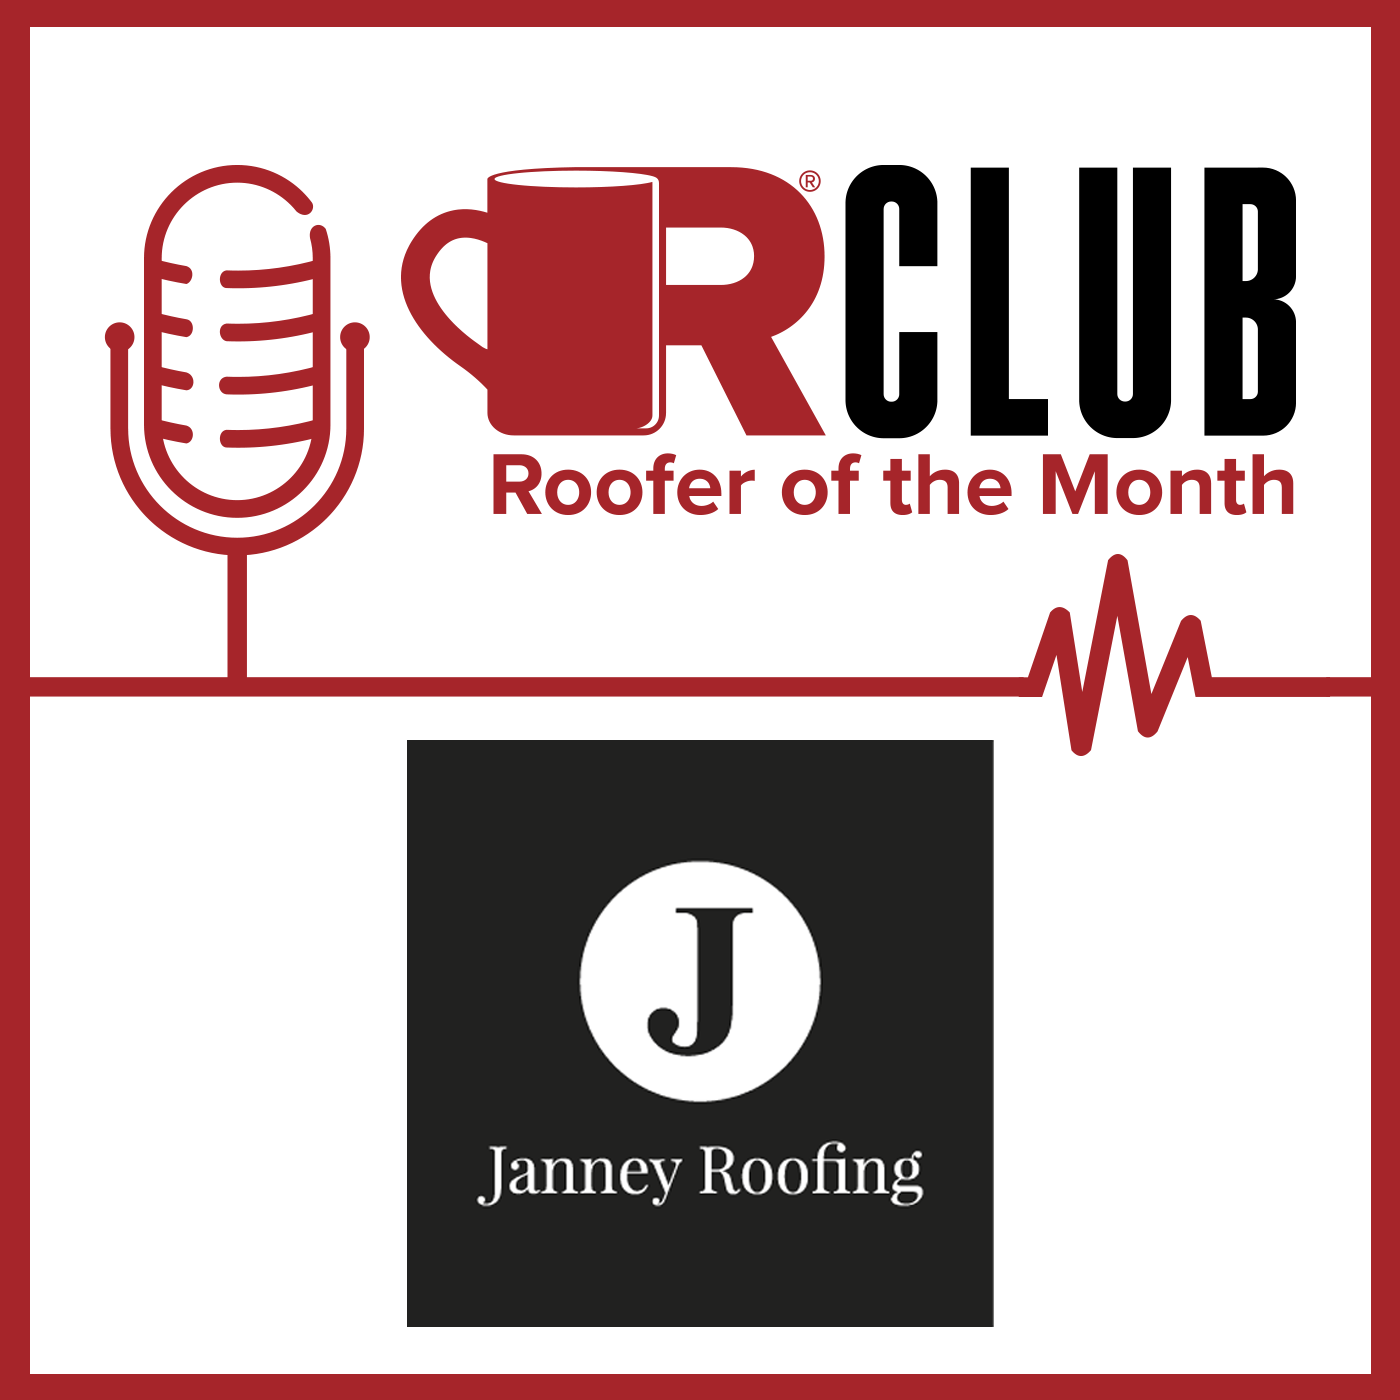 Janney Roofing - Roofer of the Month